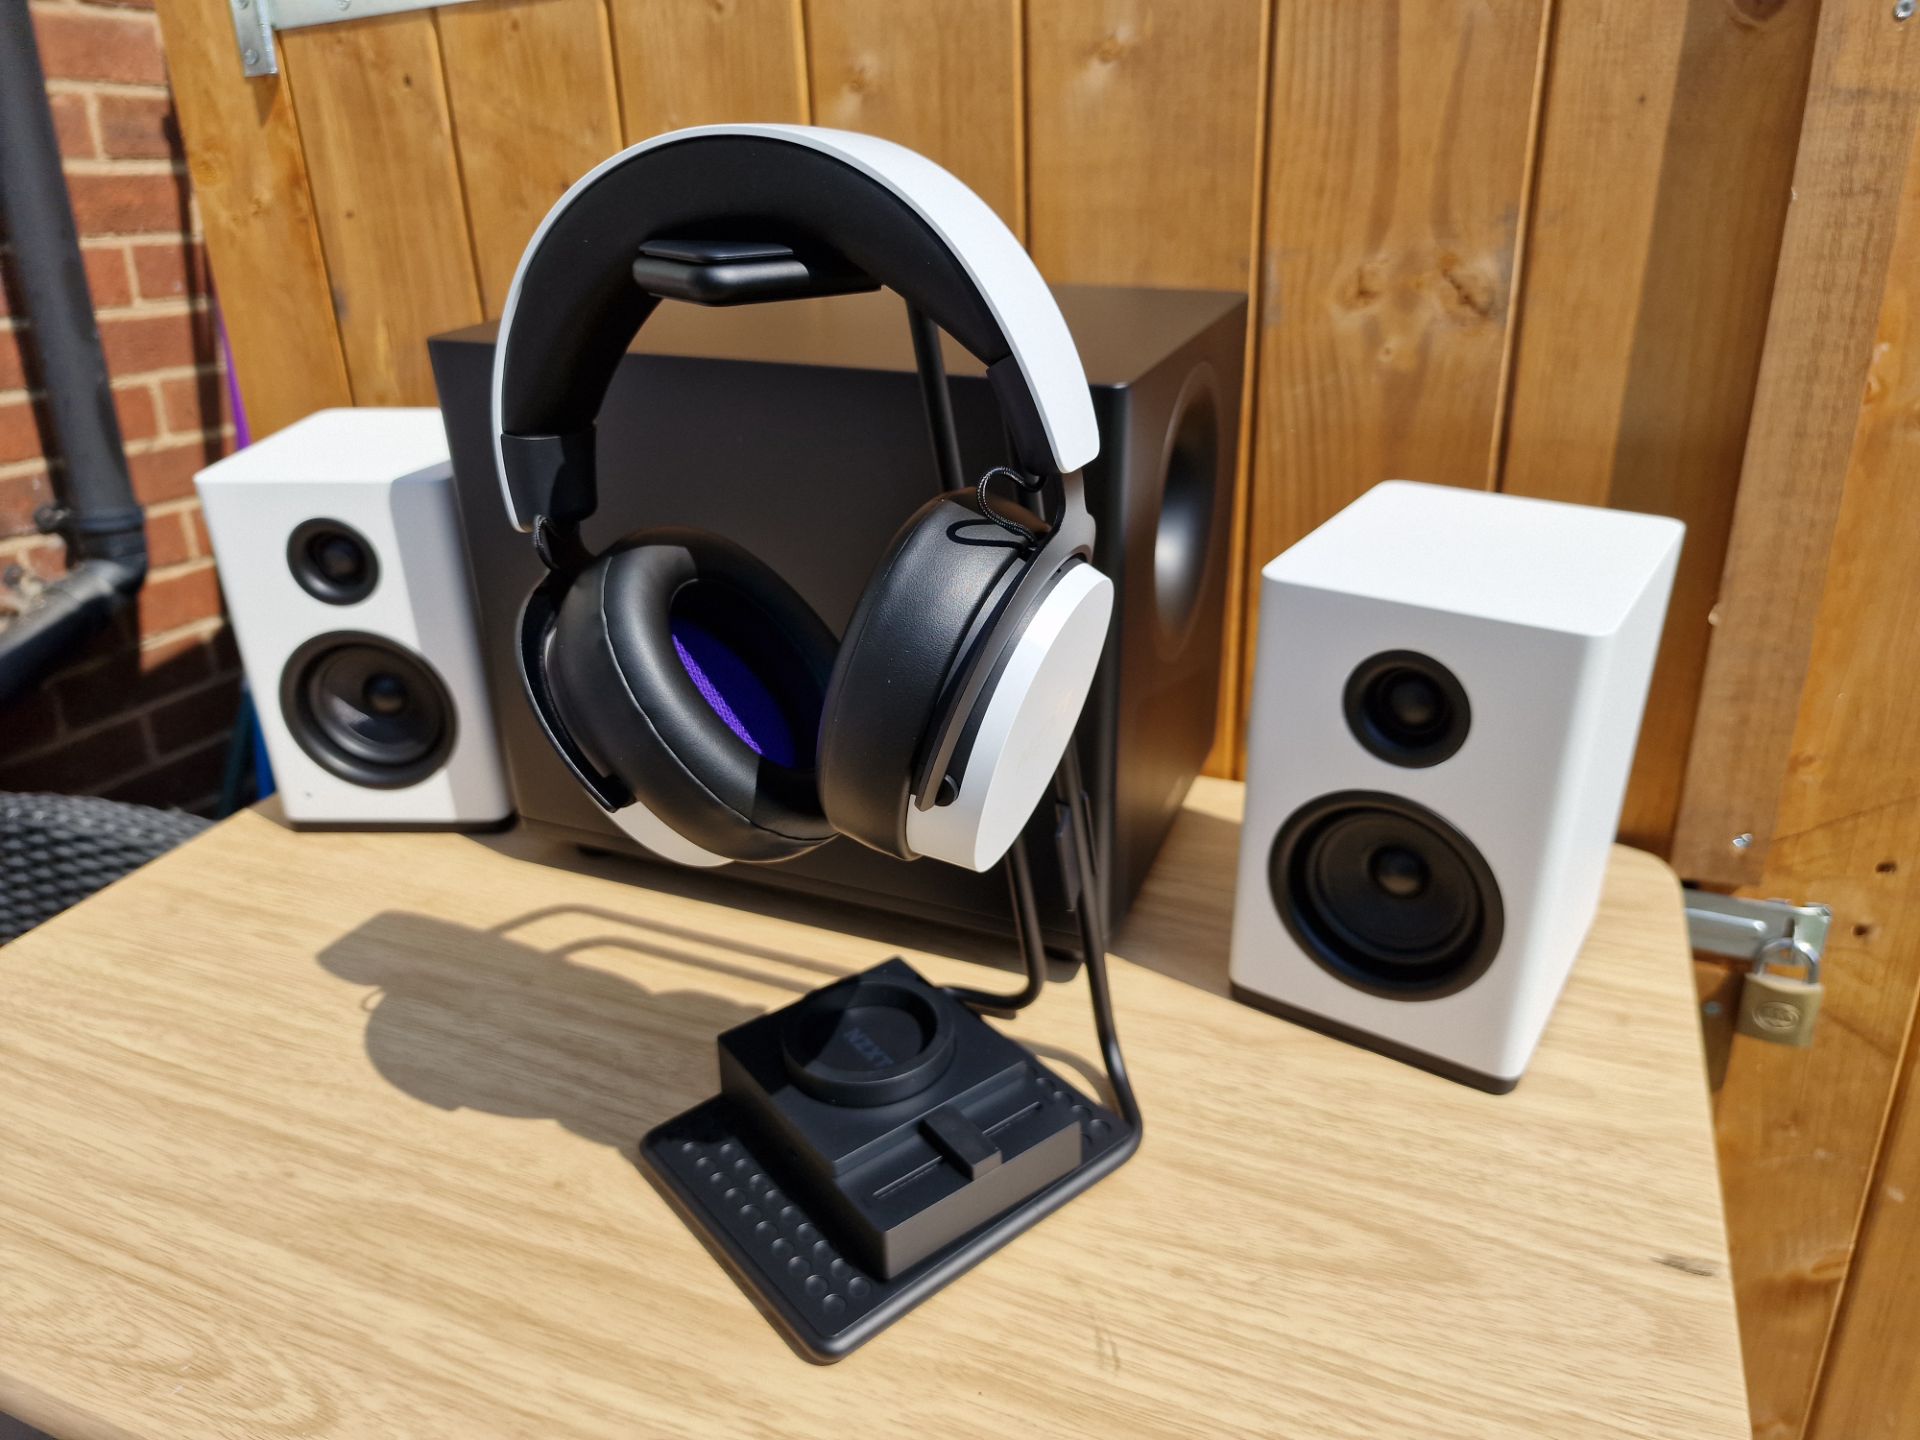 NZXT Relay Headset, SwitchMix, Speakers & Relay Subwoofer Review eTeknix